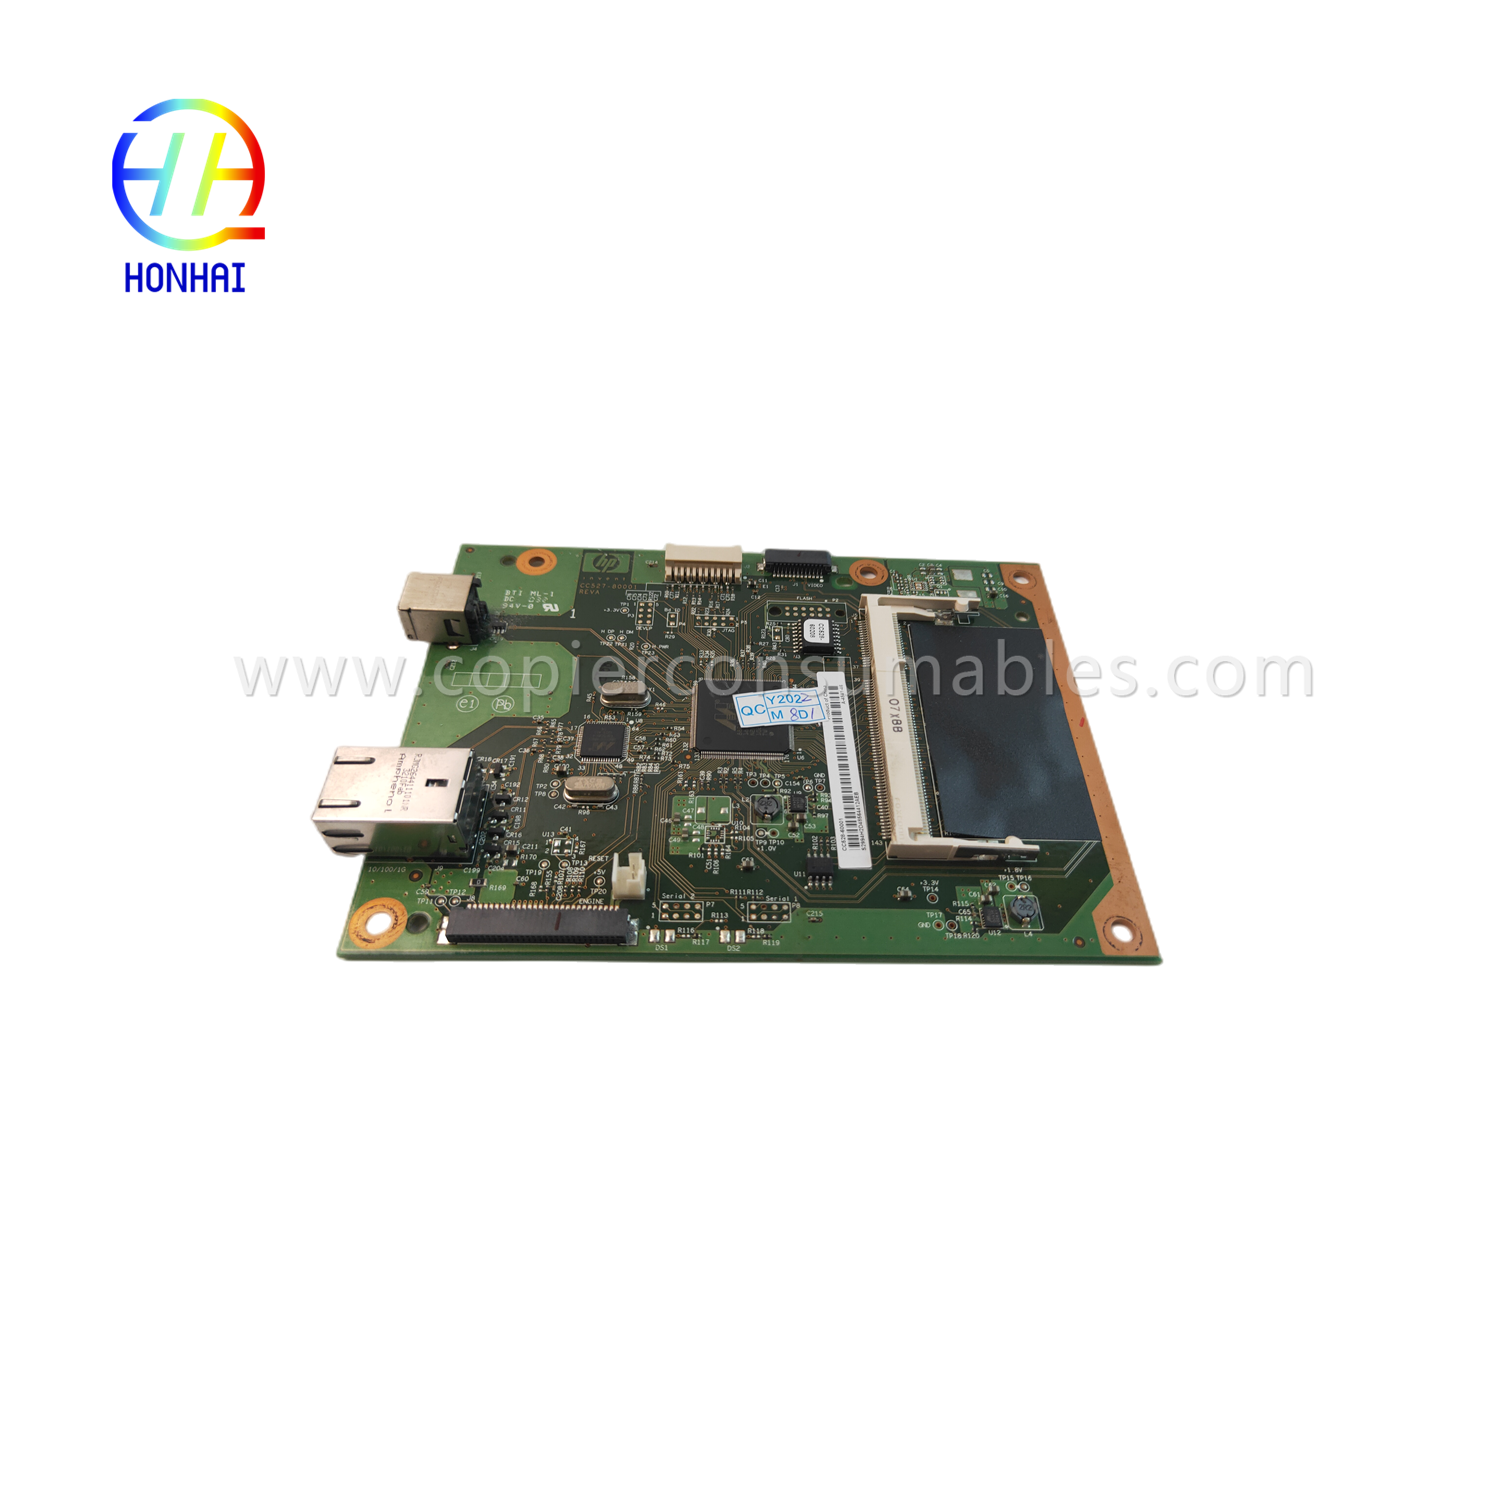 https://c585.goodao.net/formatter-board-assembly-for-hp-cc528-60001-para-laserjet-p2055dn-mainboard-product/